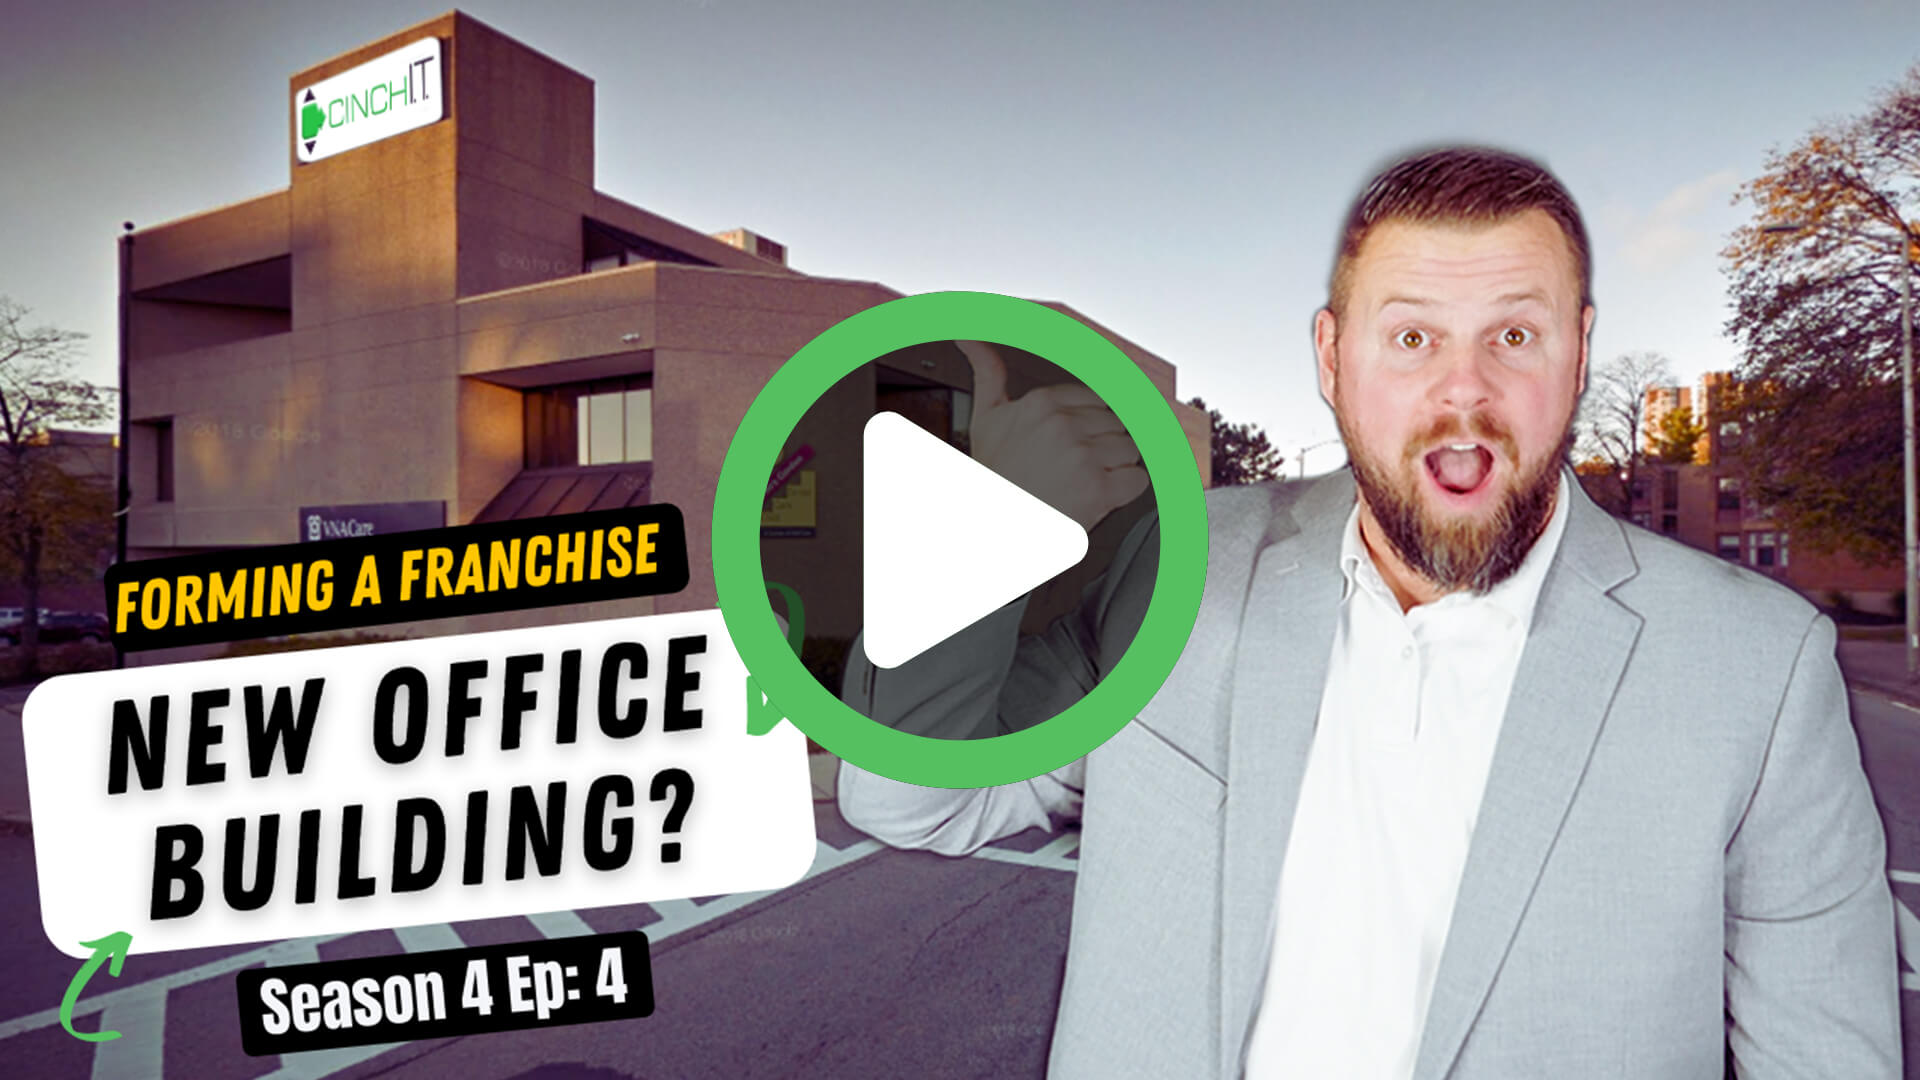 S4 EP4: It's time for a NEW OFFICE!